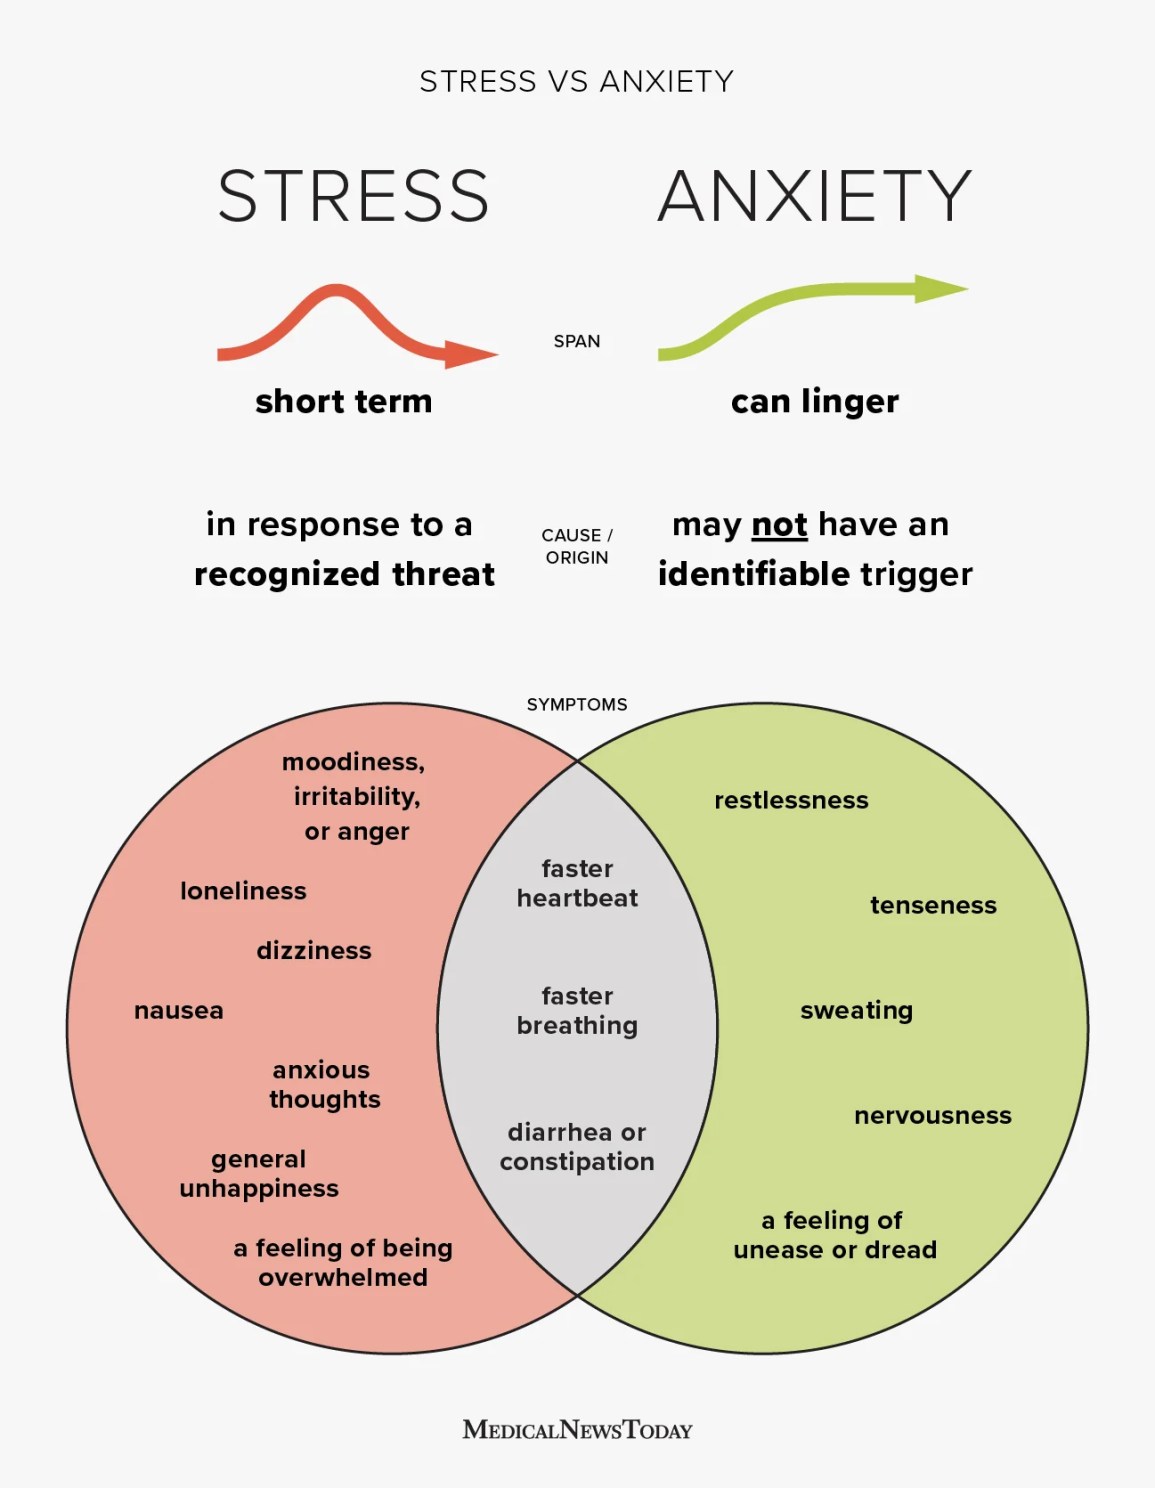 What is the difference between anxiety and stress?